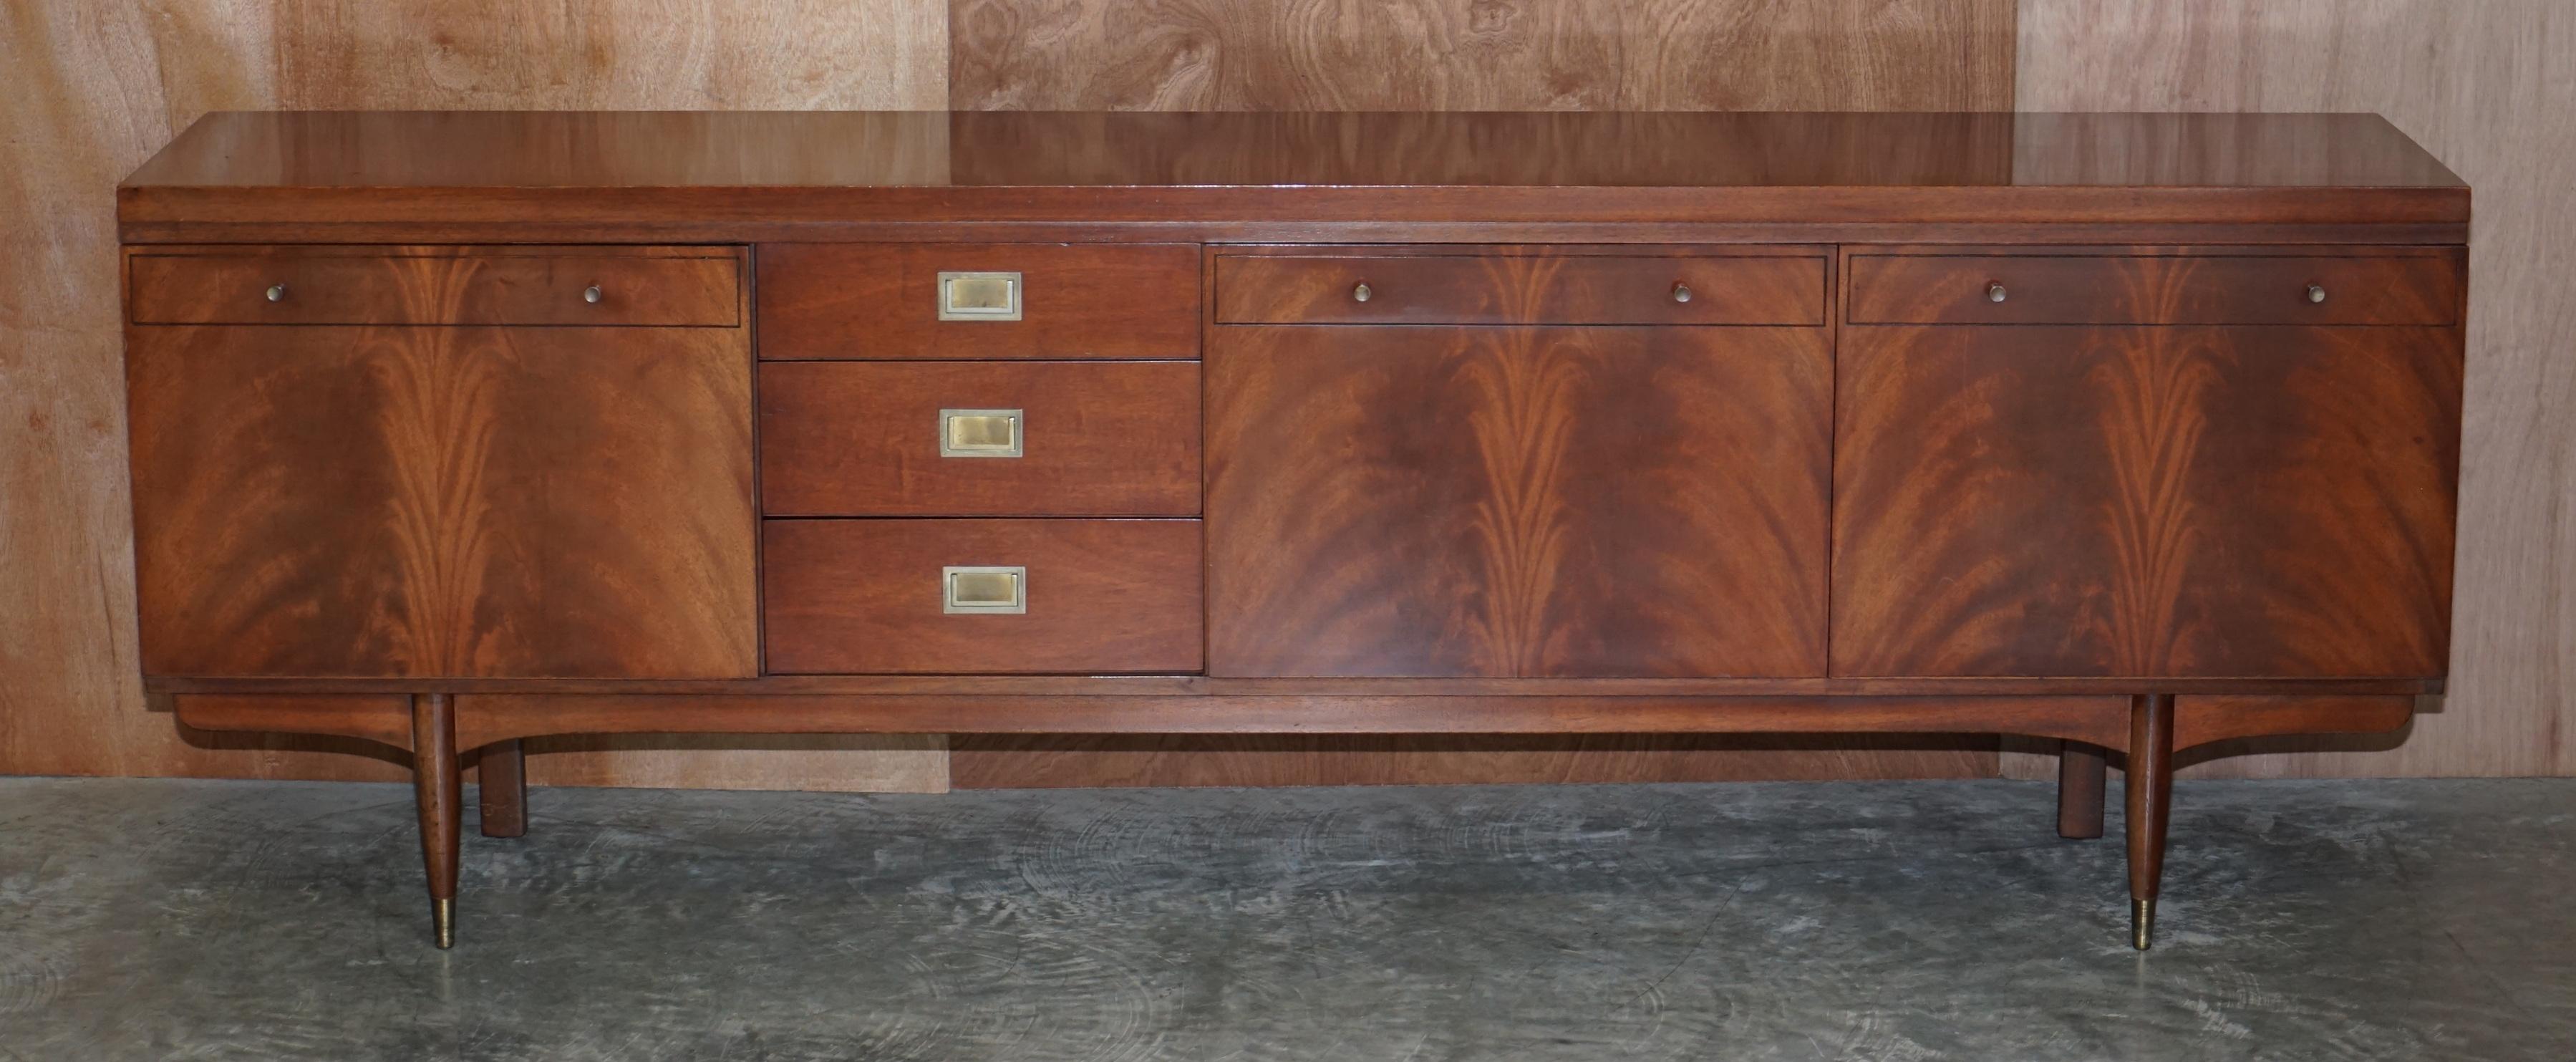 We are delighted to offer for sale this lovely Greaves 7 Thomas 1966 stamped flamed mahogany sideboard with campaign handles.

A very good looking and well made piece of mid century modern art furniture. The frame is all mahogany with flamed